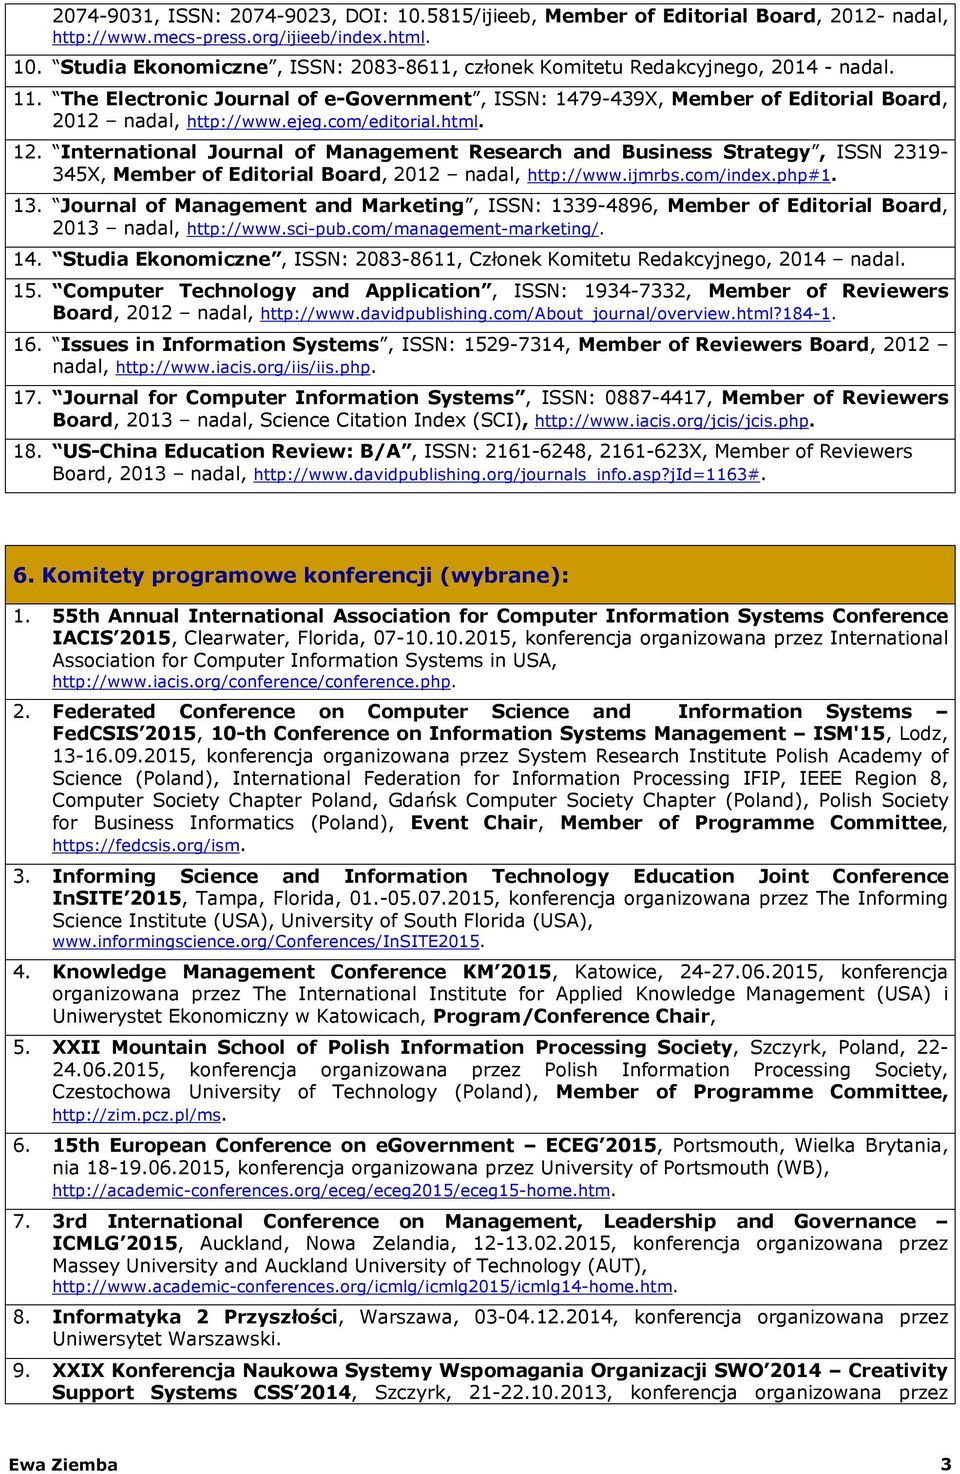 International Journal of Management Research and Business Strategy, ISSN 2319-345X, Member of Editorial Board, 2012 nadal, http://www.ijmrbs.com/index.php#1. 13.